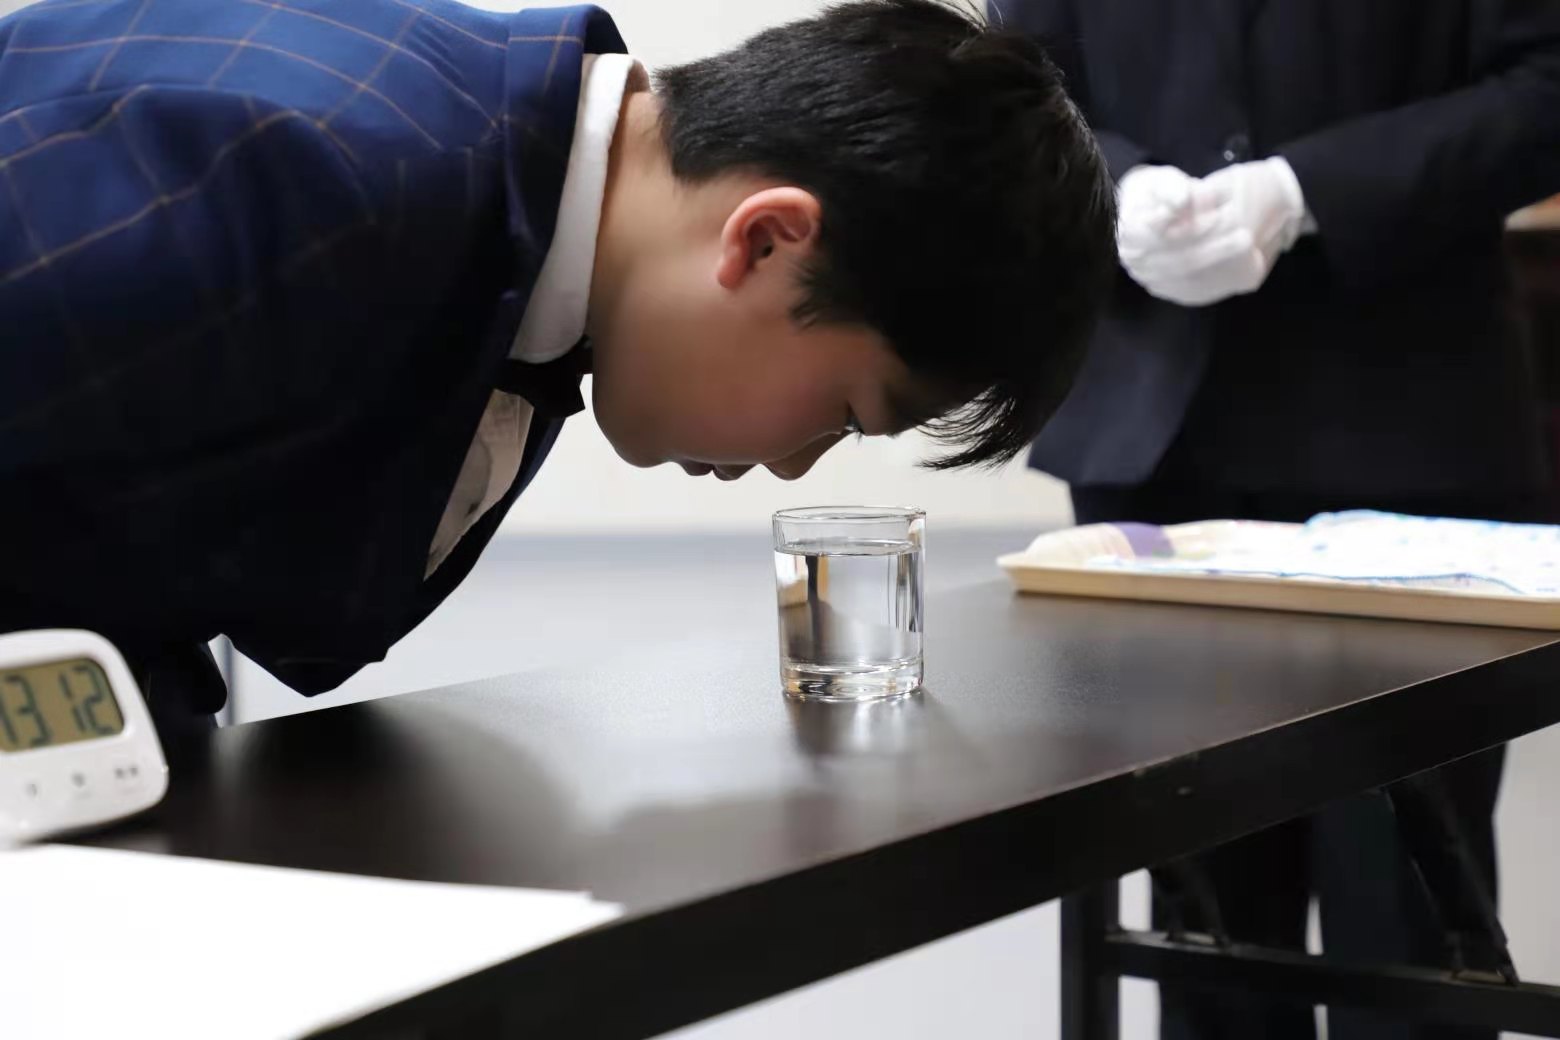 Youngest person to visually identify 521 cups of water